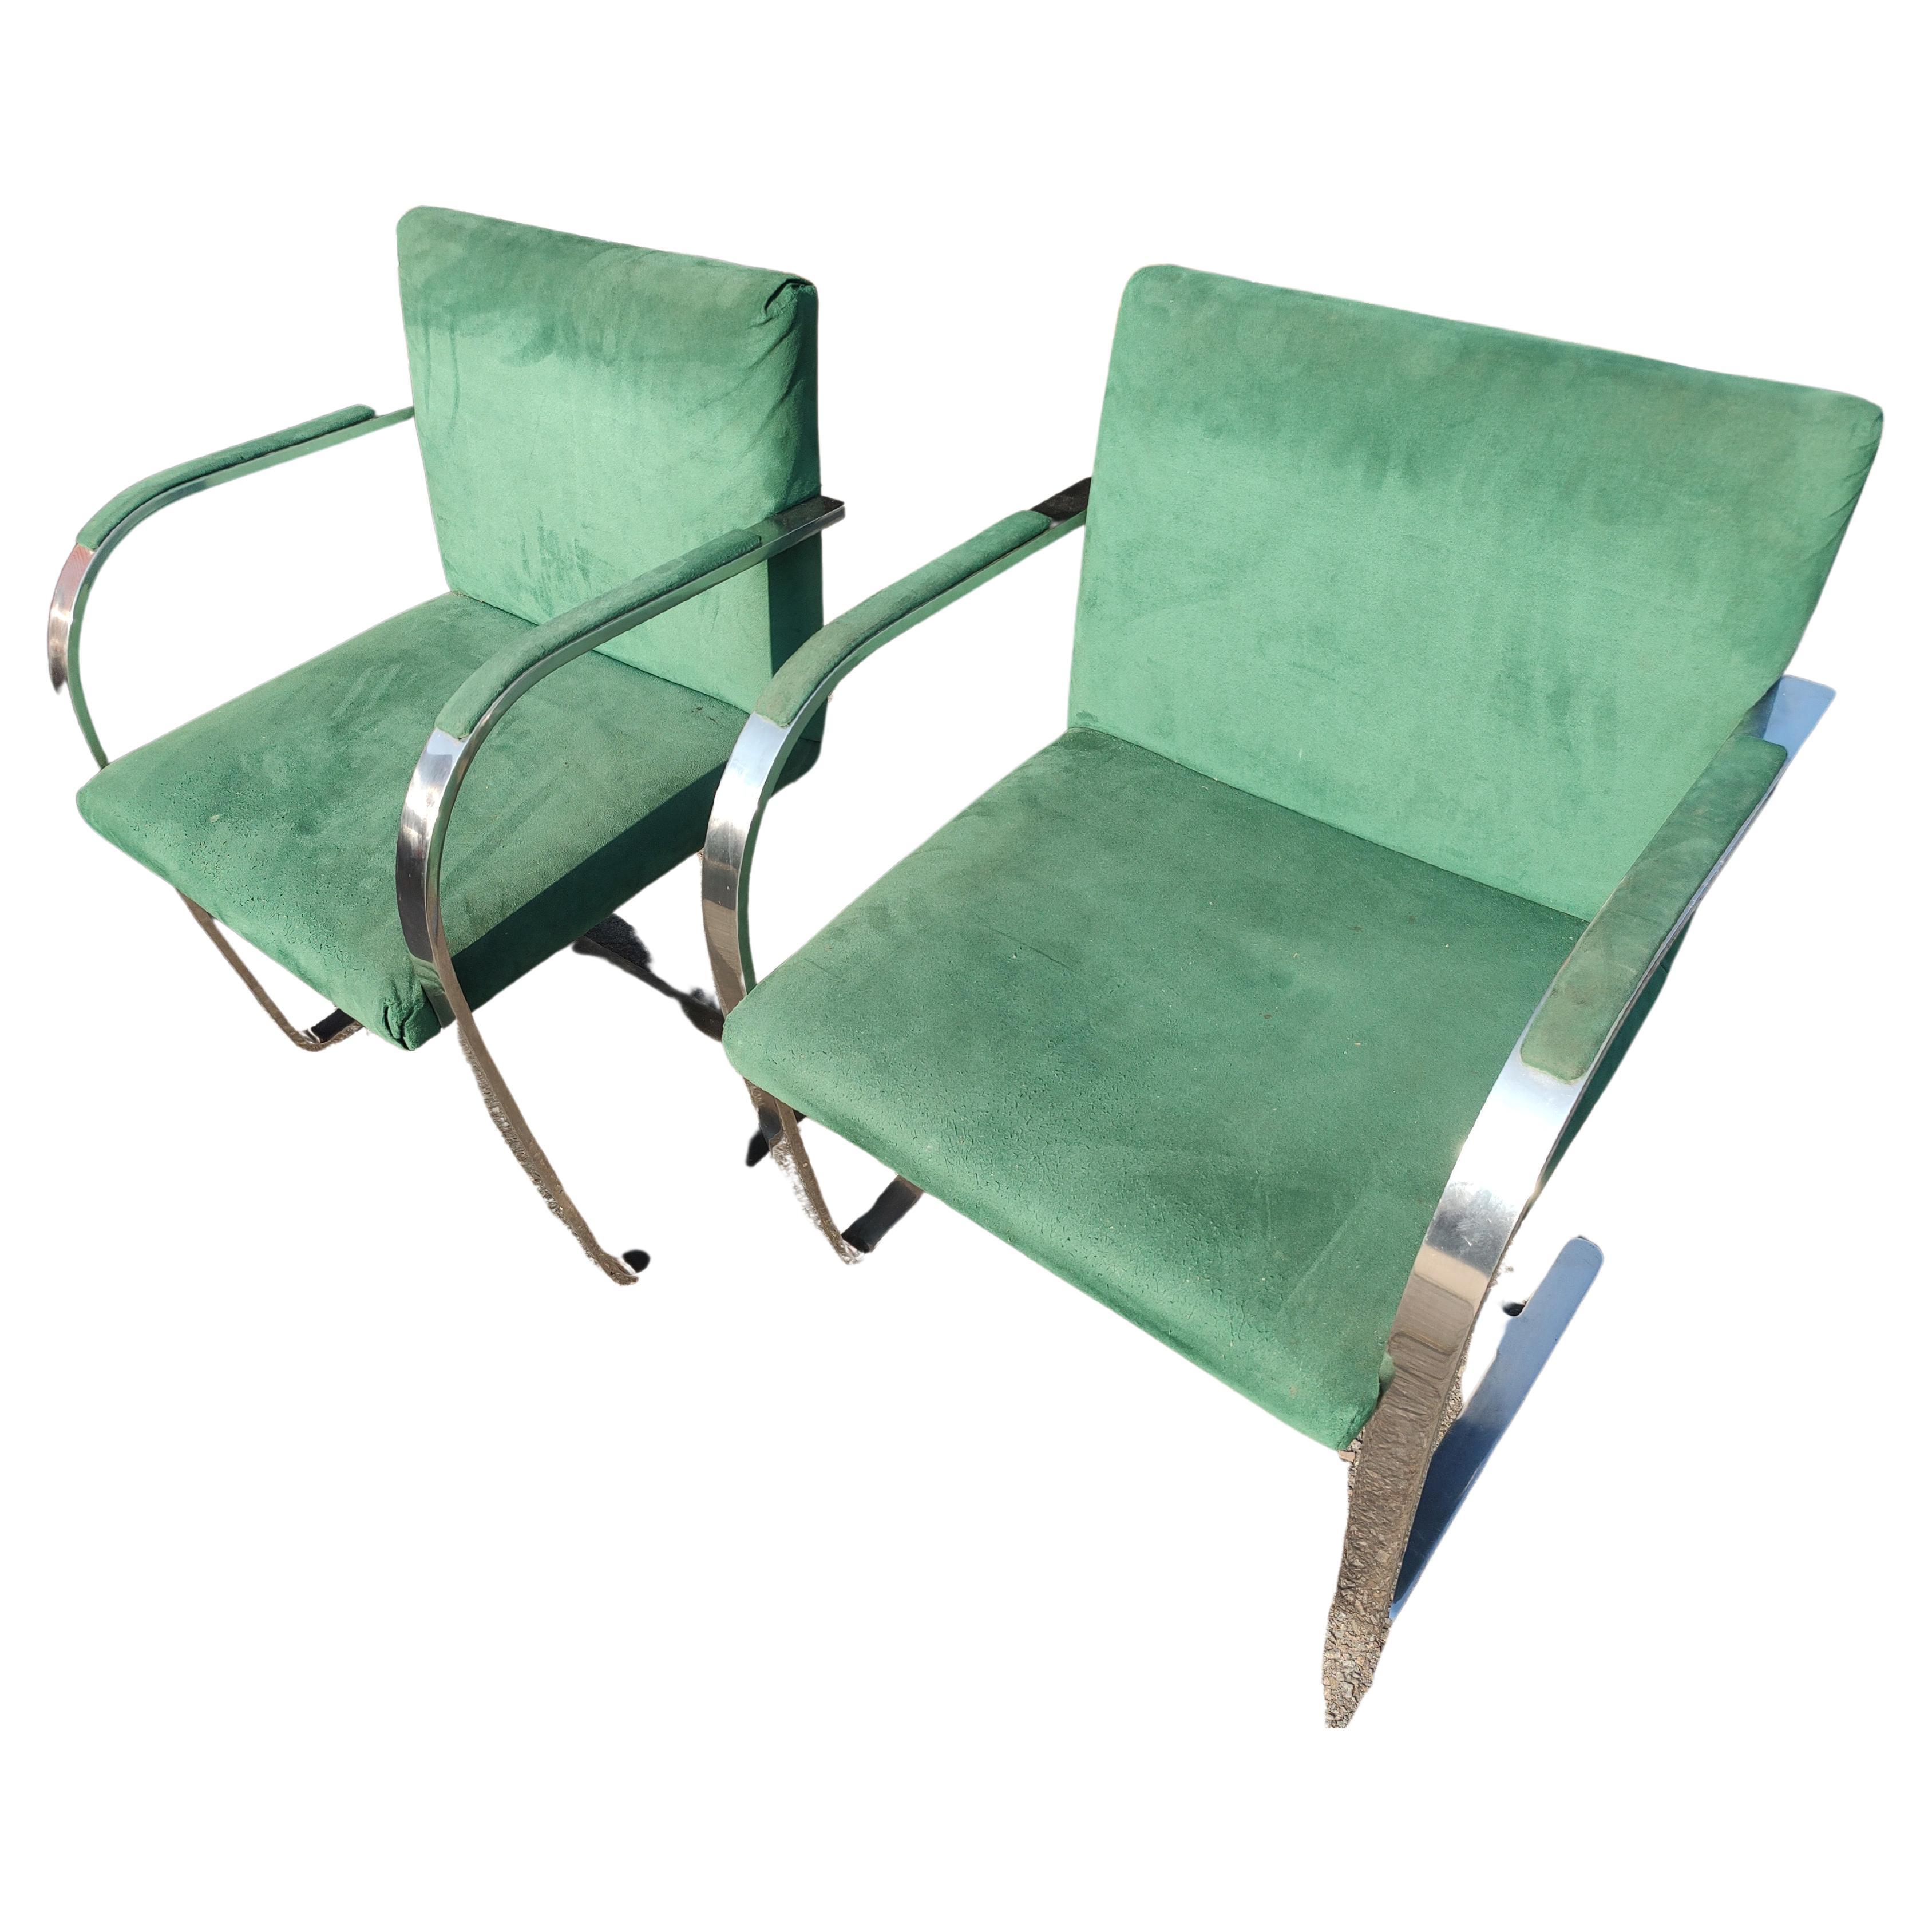 Hand-Crafted Pair of Mid Century Modern Bauhaus Styled Brno Chairs  Ludwig Mies van DerRohe  For Sale